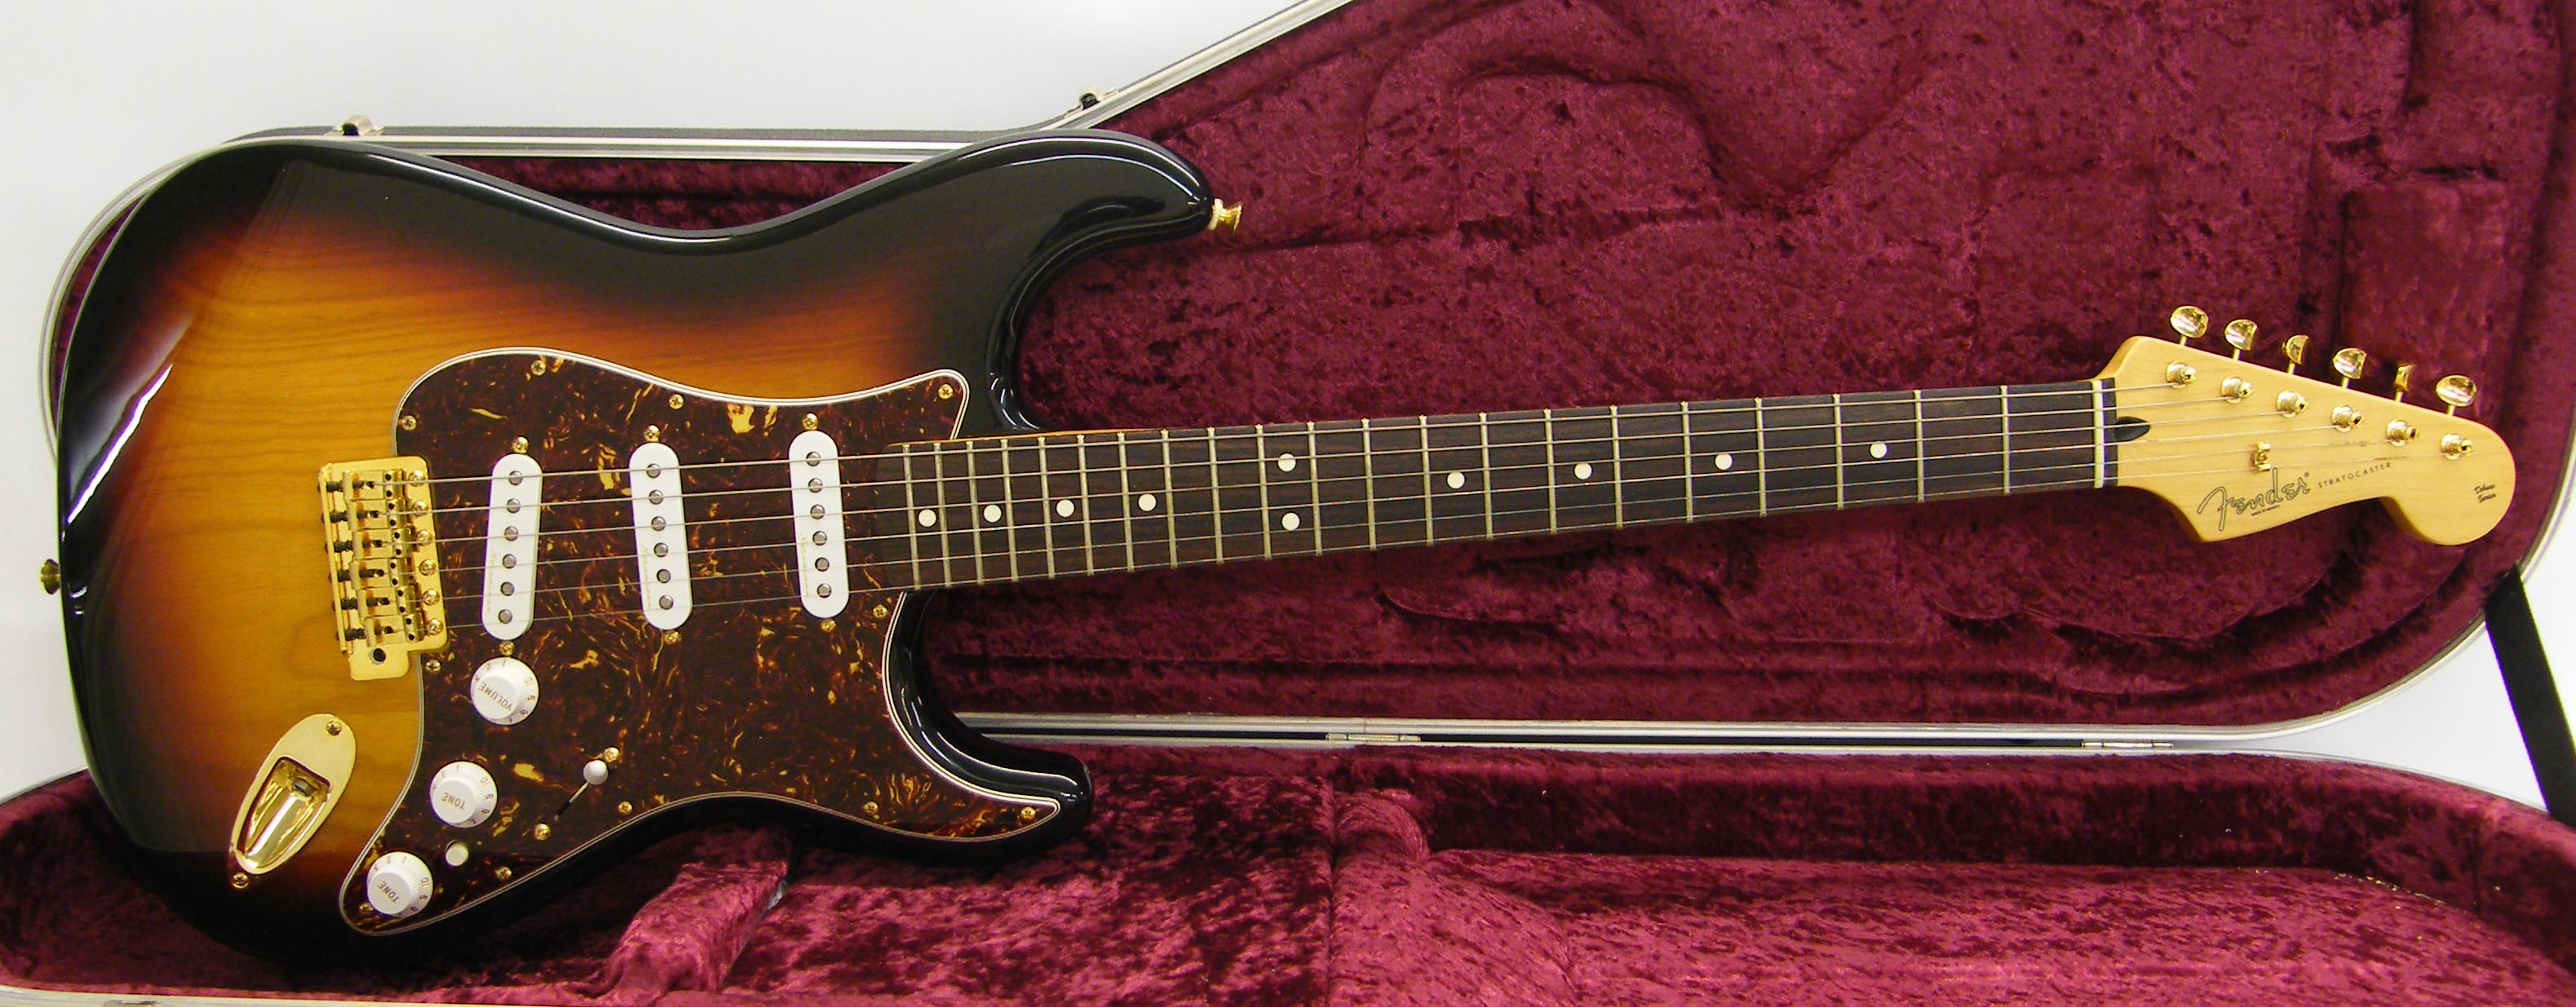 Fender Deluxe Series Stratocaster electric guitar, made in Mexico, ser. no. MZ7119774, sunburst